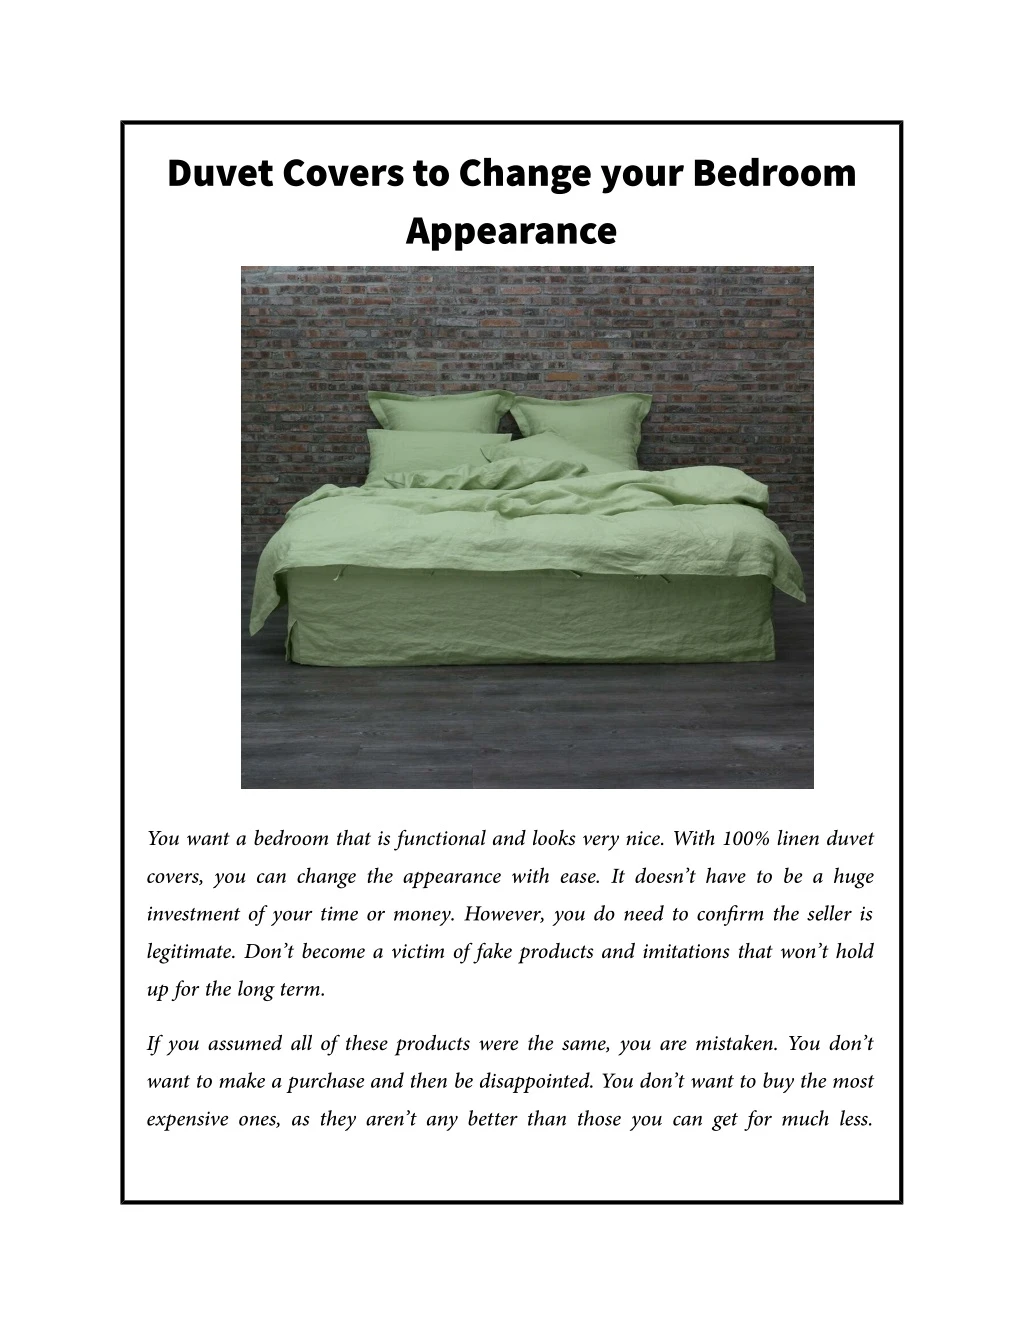 duvet covers to change your bedroom appearance